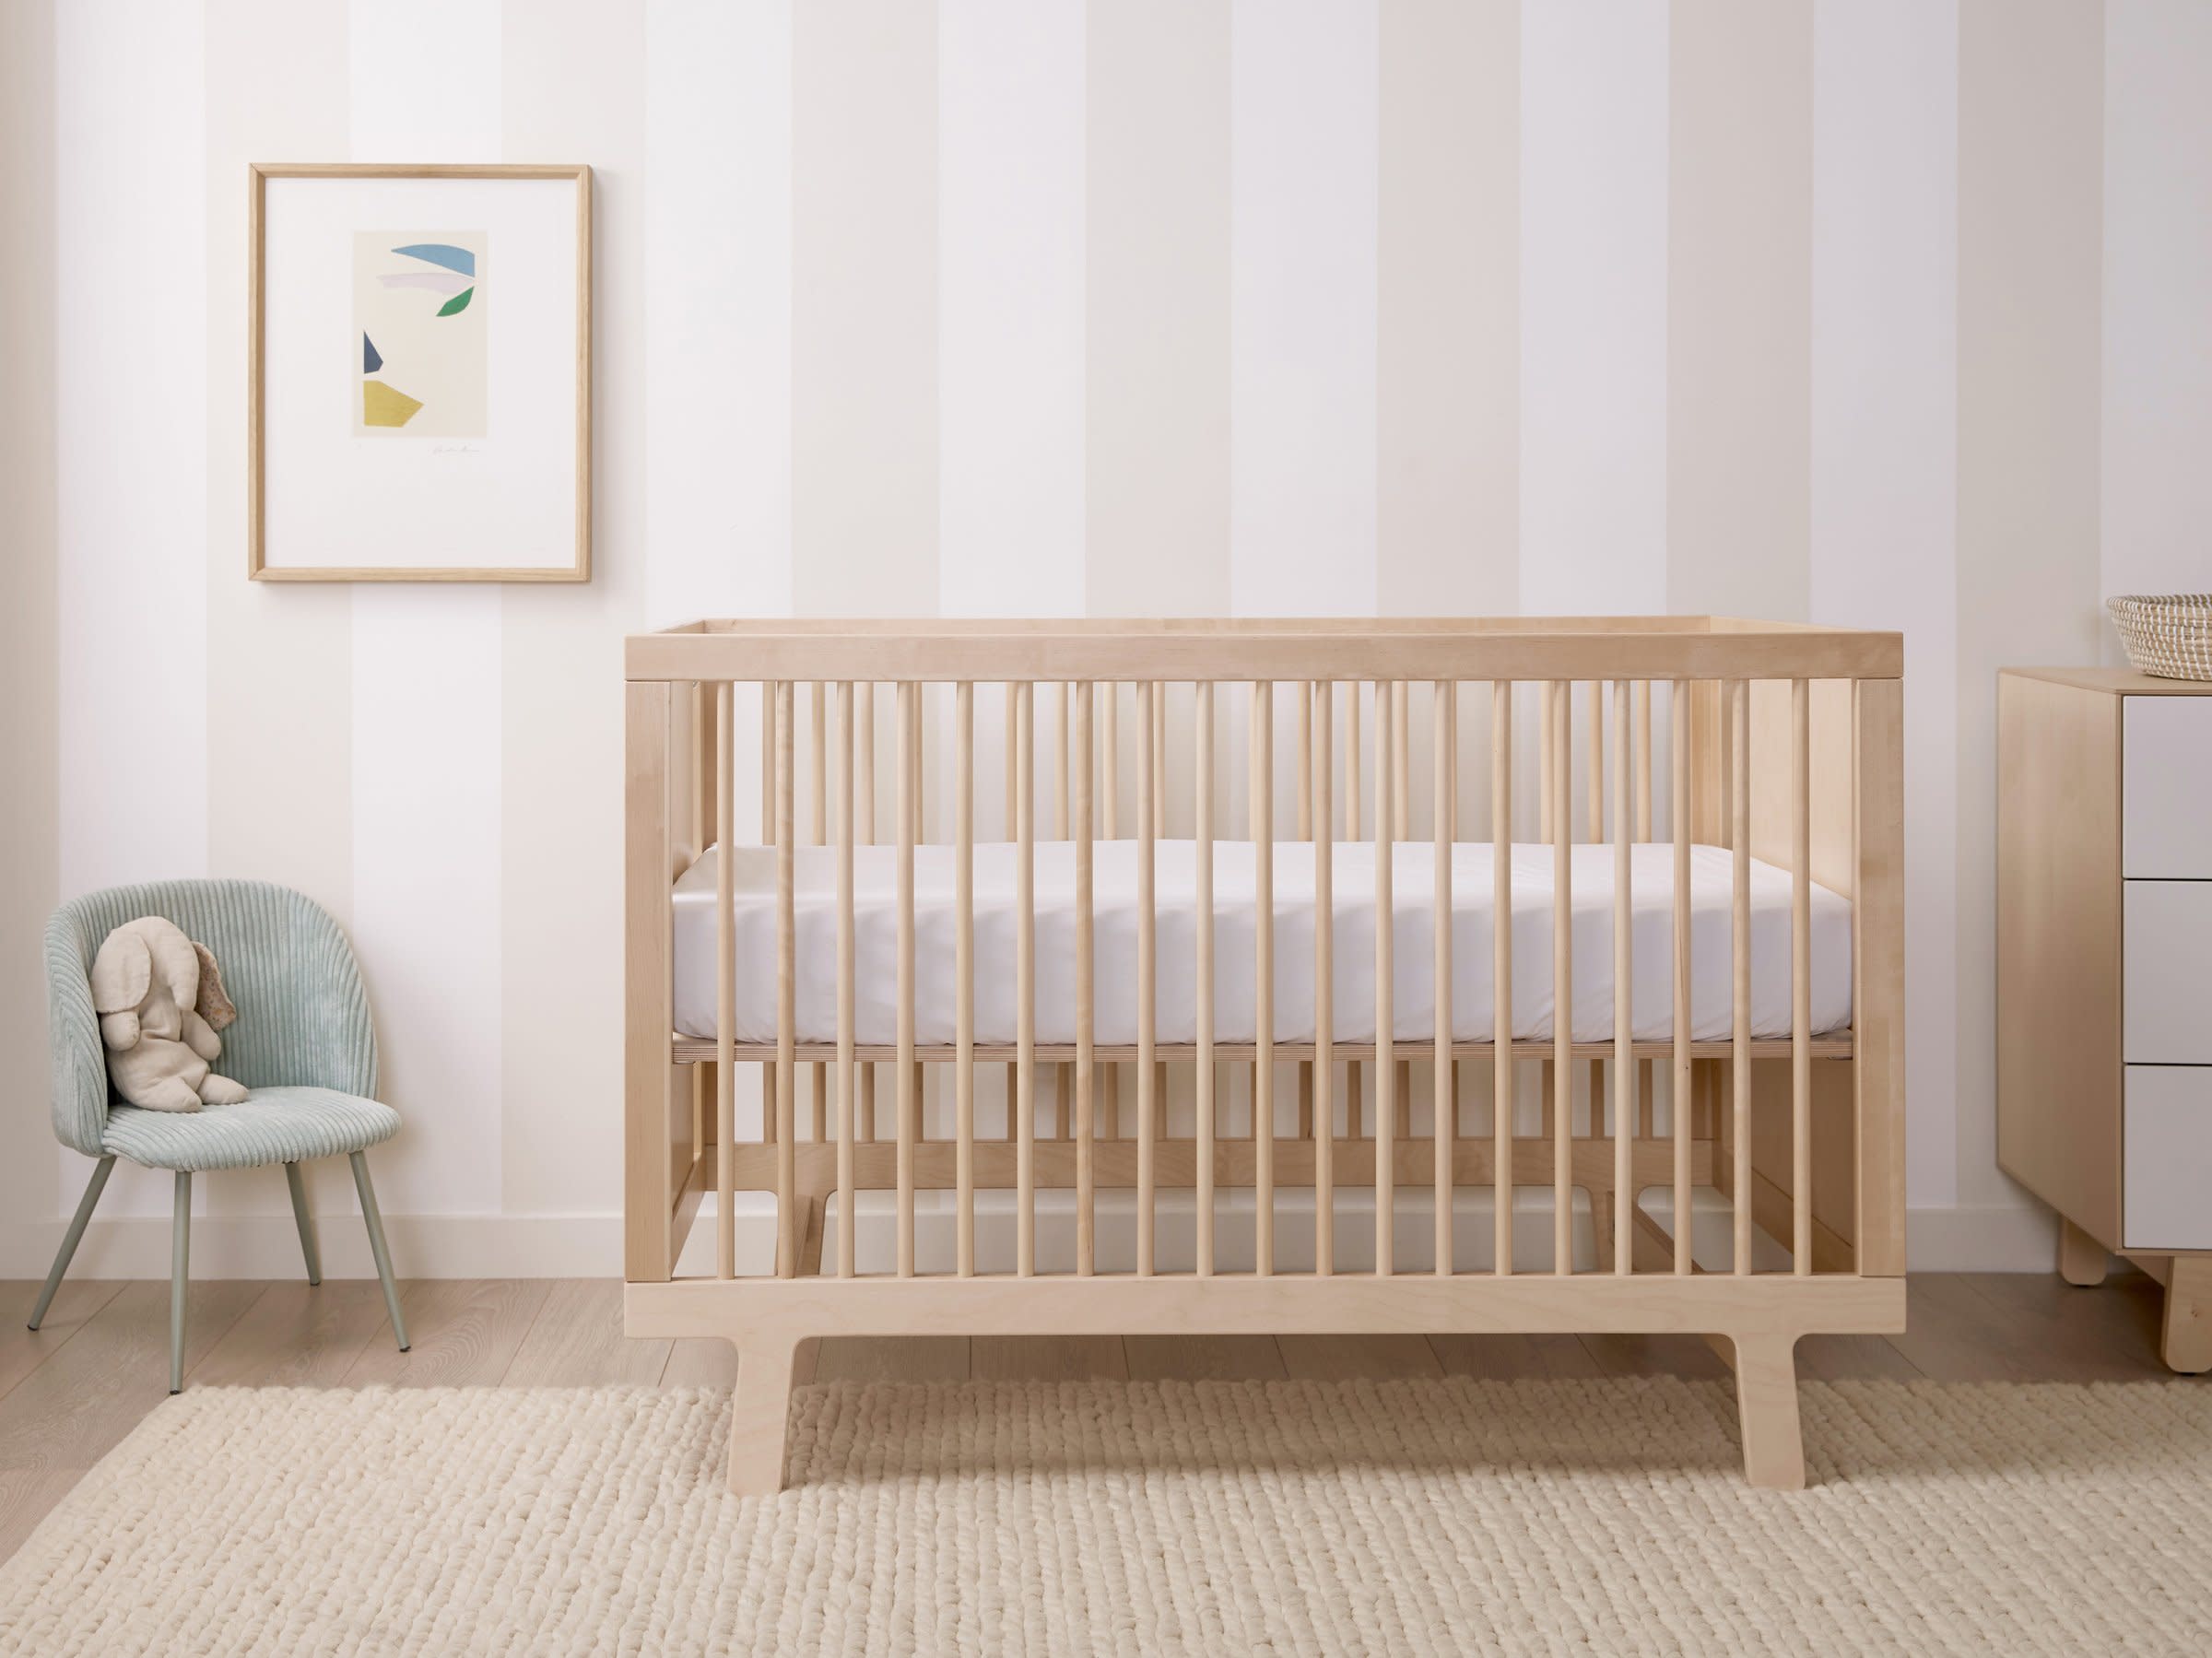 Sparrow Crib Shown In A Room